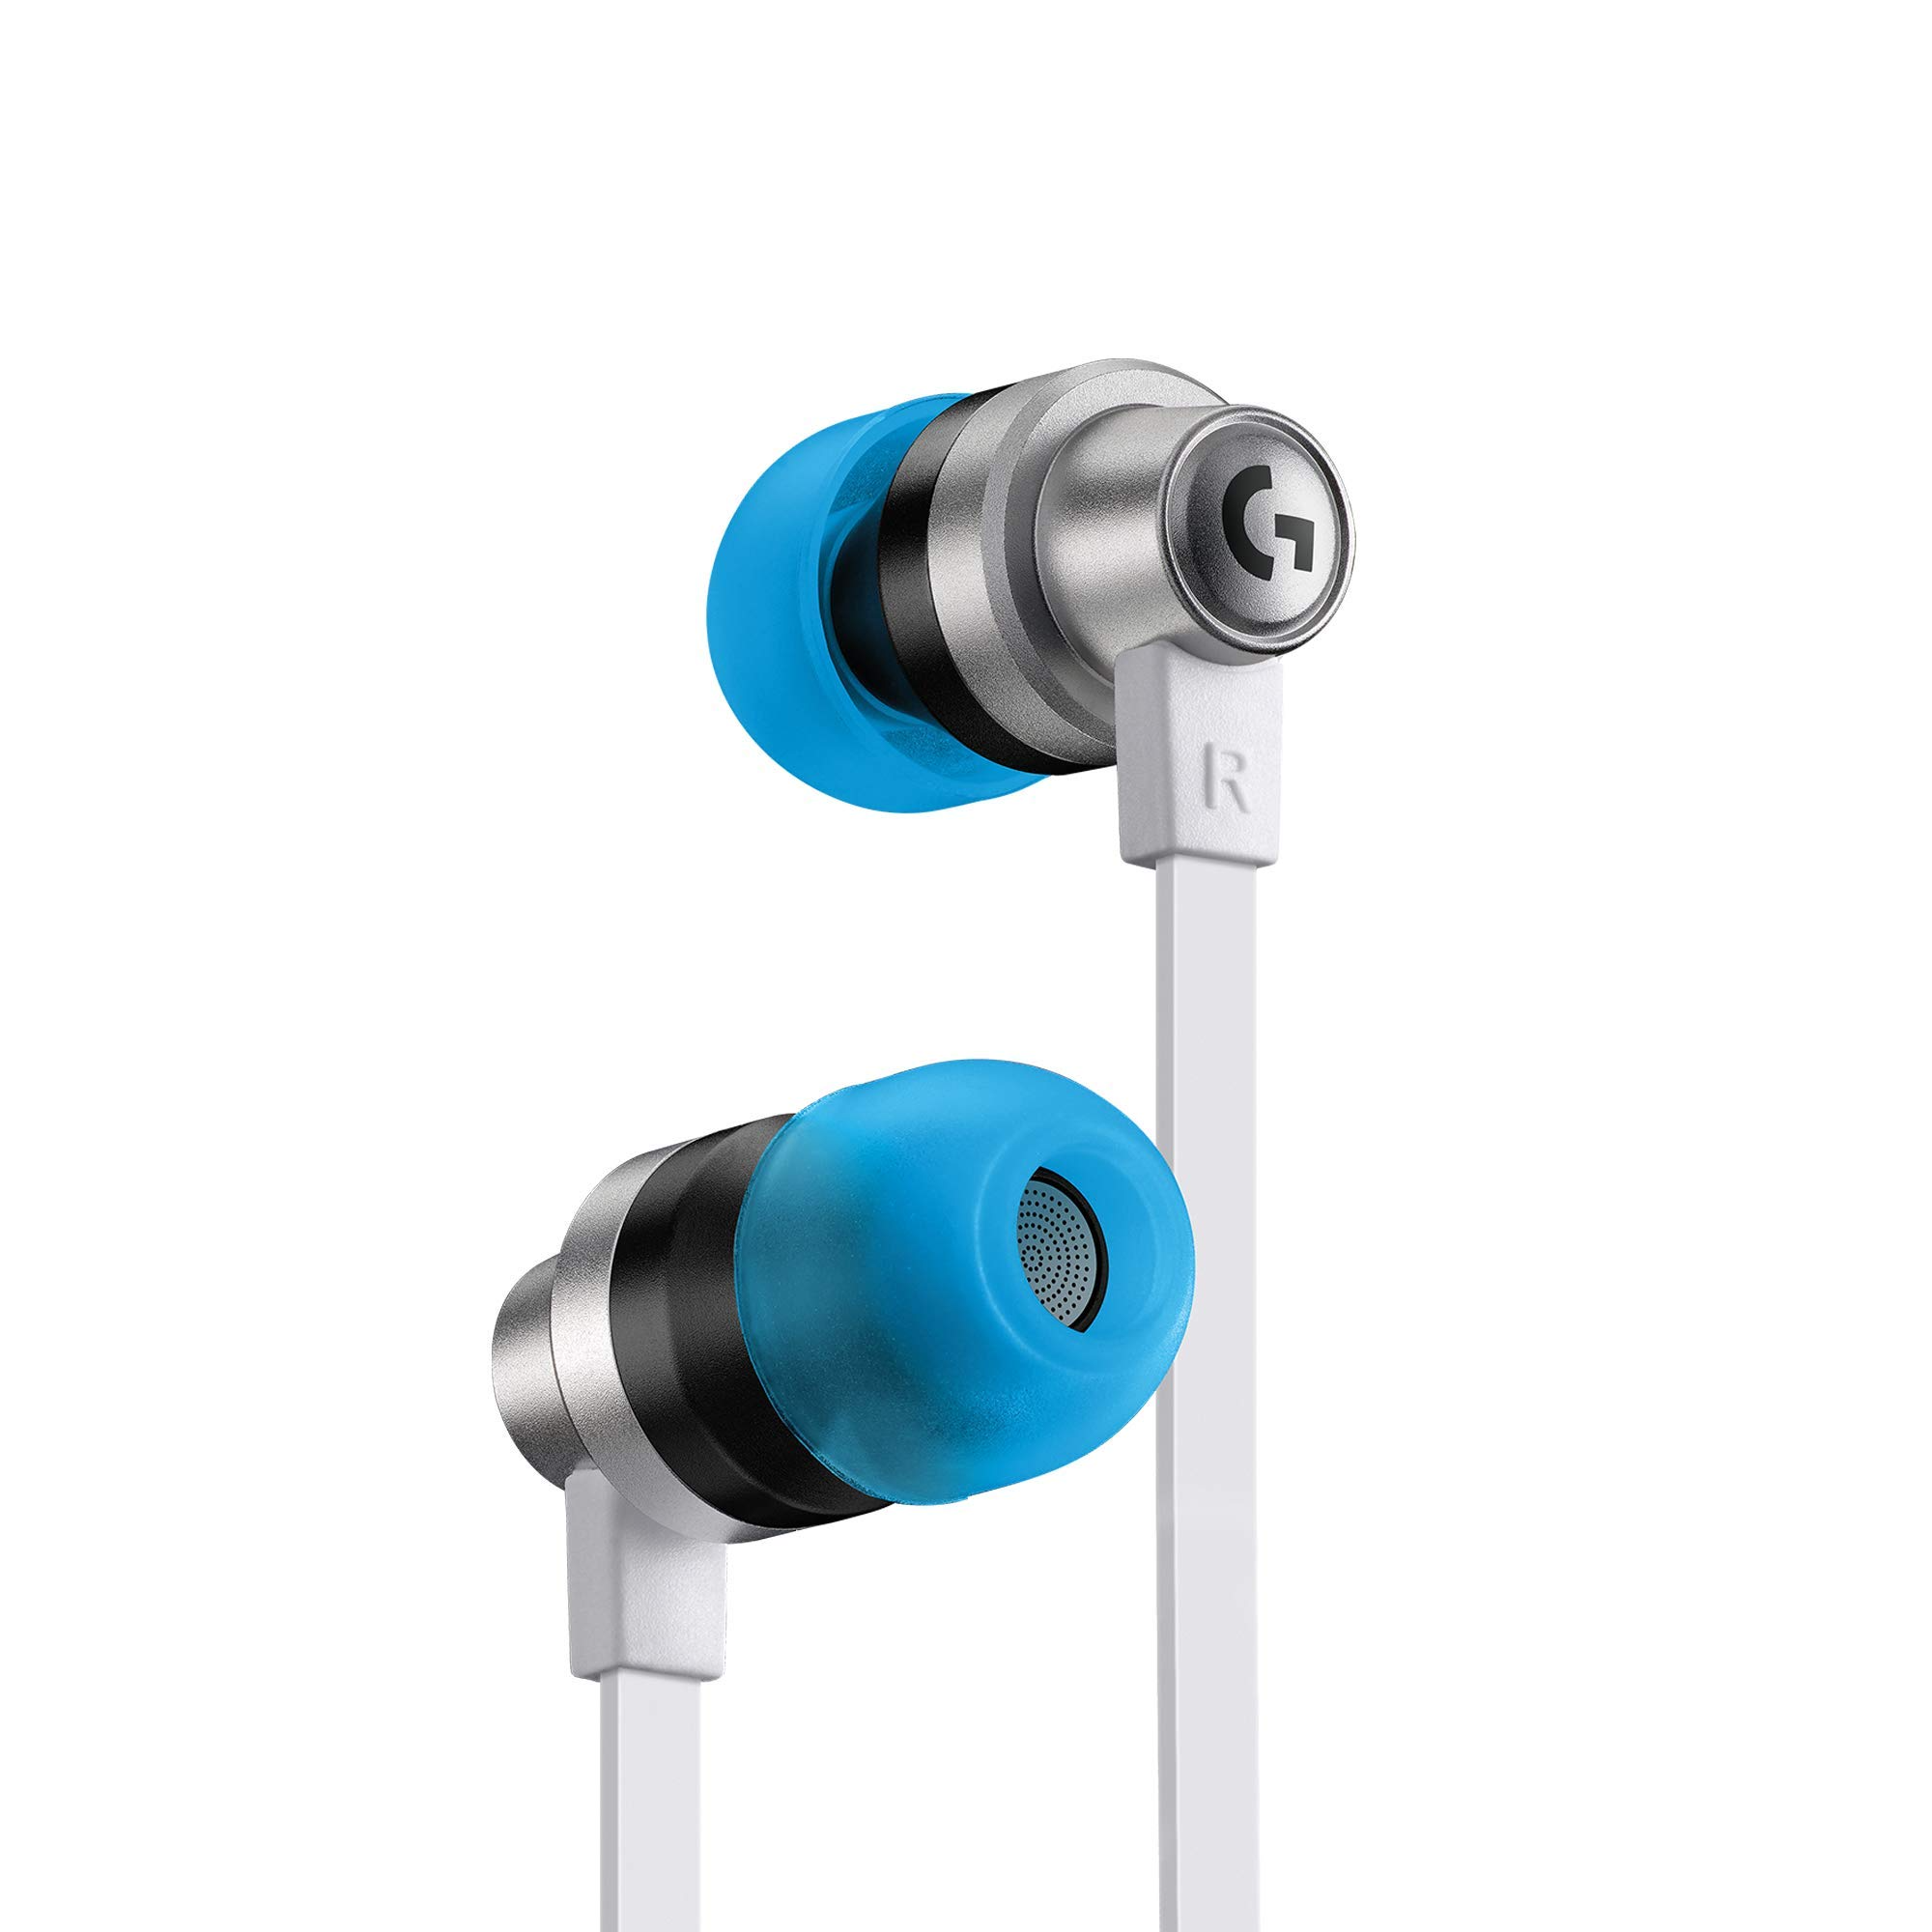 Blue and silver Logitech G333 gaming earphones